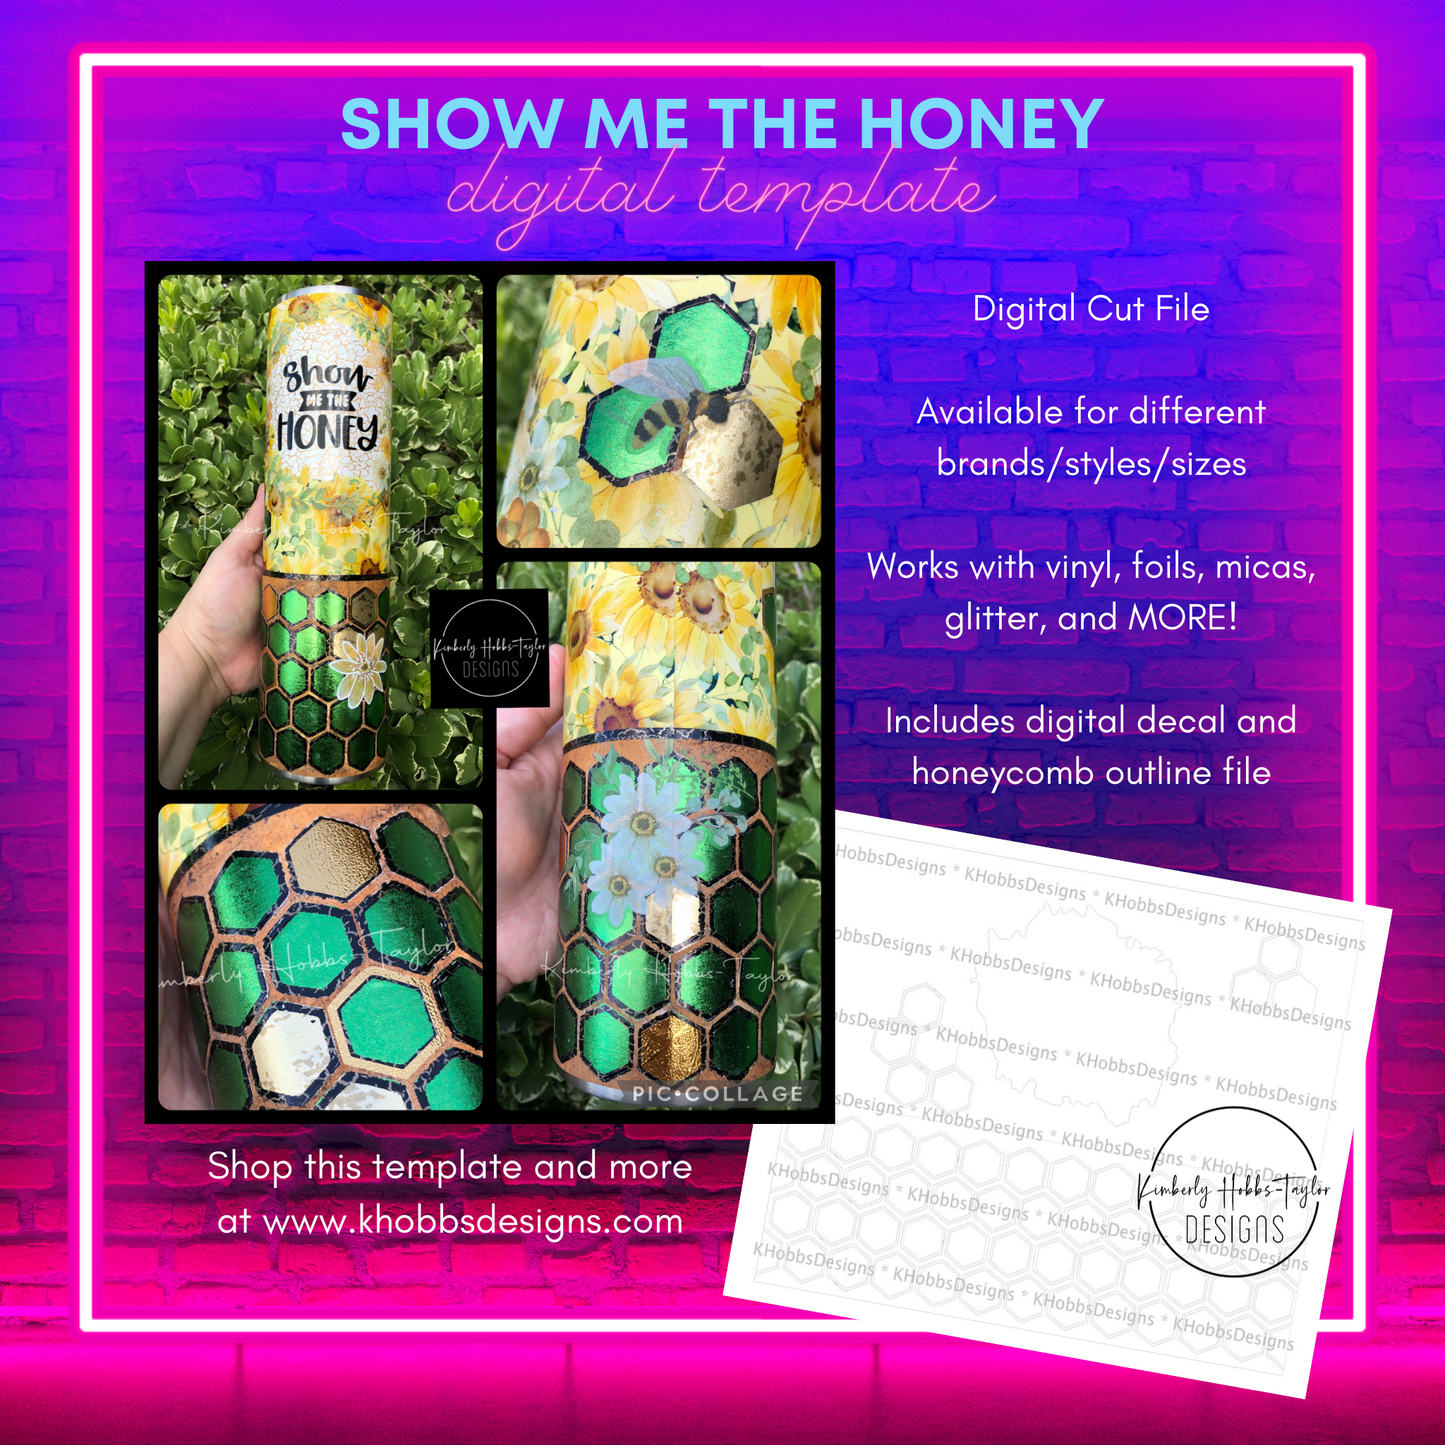 Show Me The Honey Template for HOGG 30 Skinny Straight - Digital Cut File Only